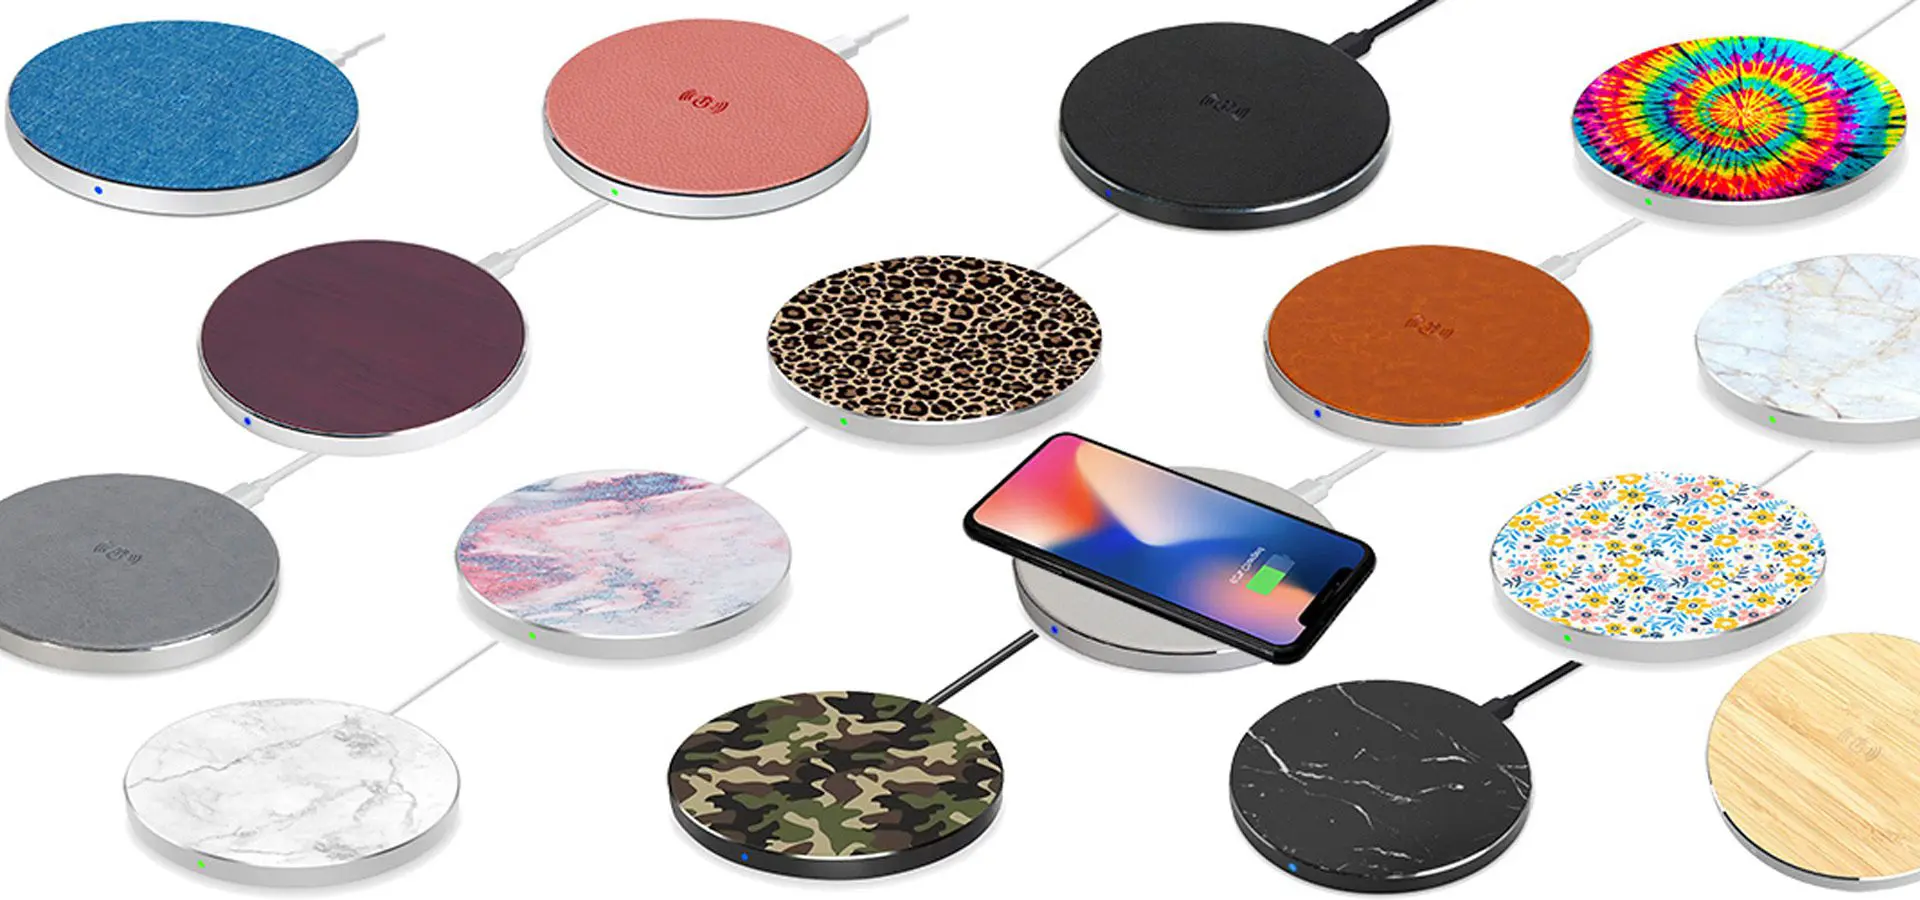 A collection of wireless charging pads in various colors and patterns, including a phone charging on one of the pads.